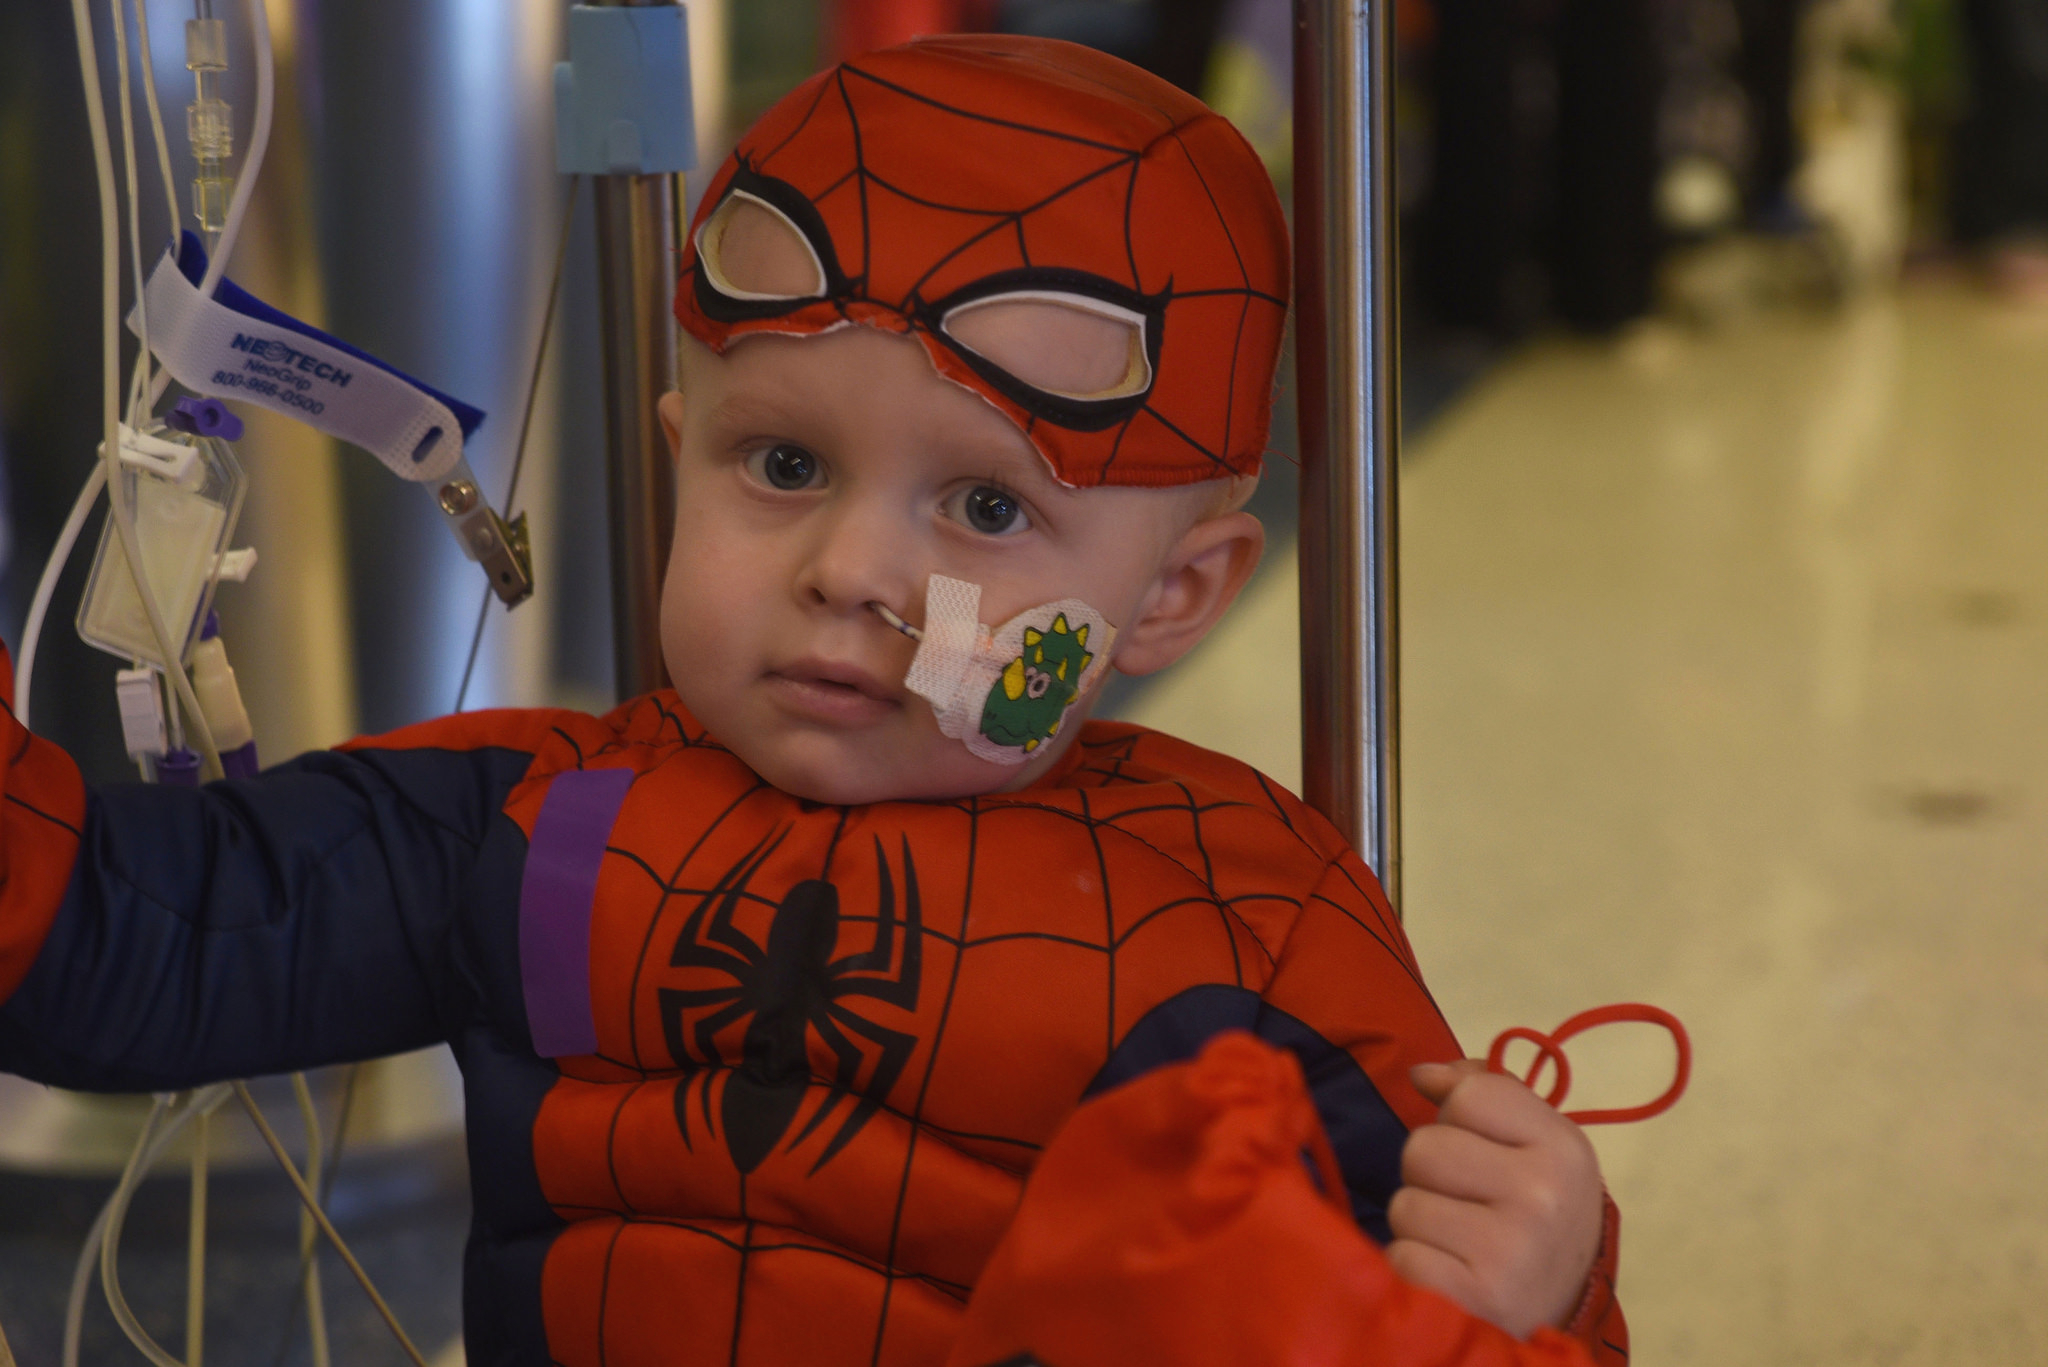 A young child in a Spiderman costume poses for a photo while sitting on the base of an IV pole. Some IV cords are in the background. The child holds a red bag with one hand.